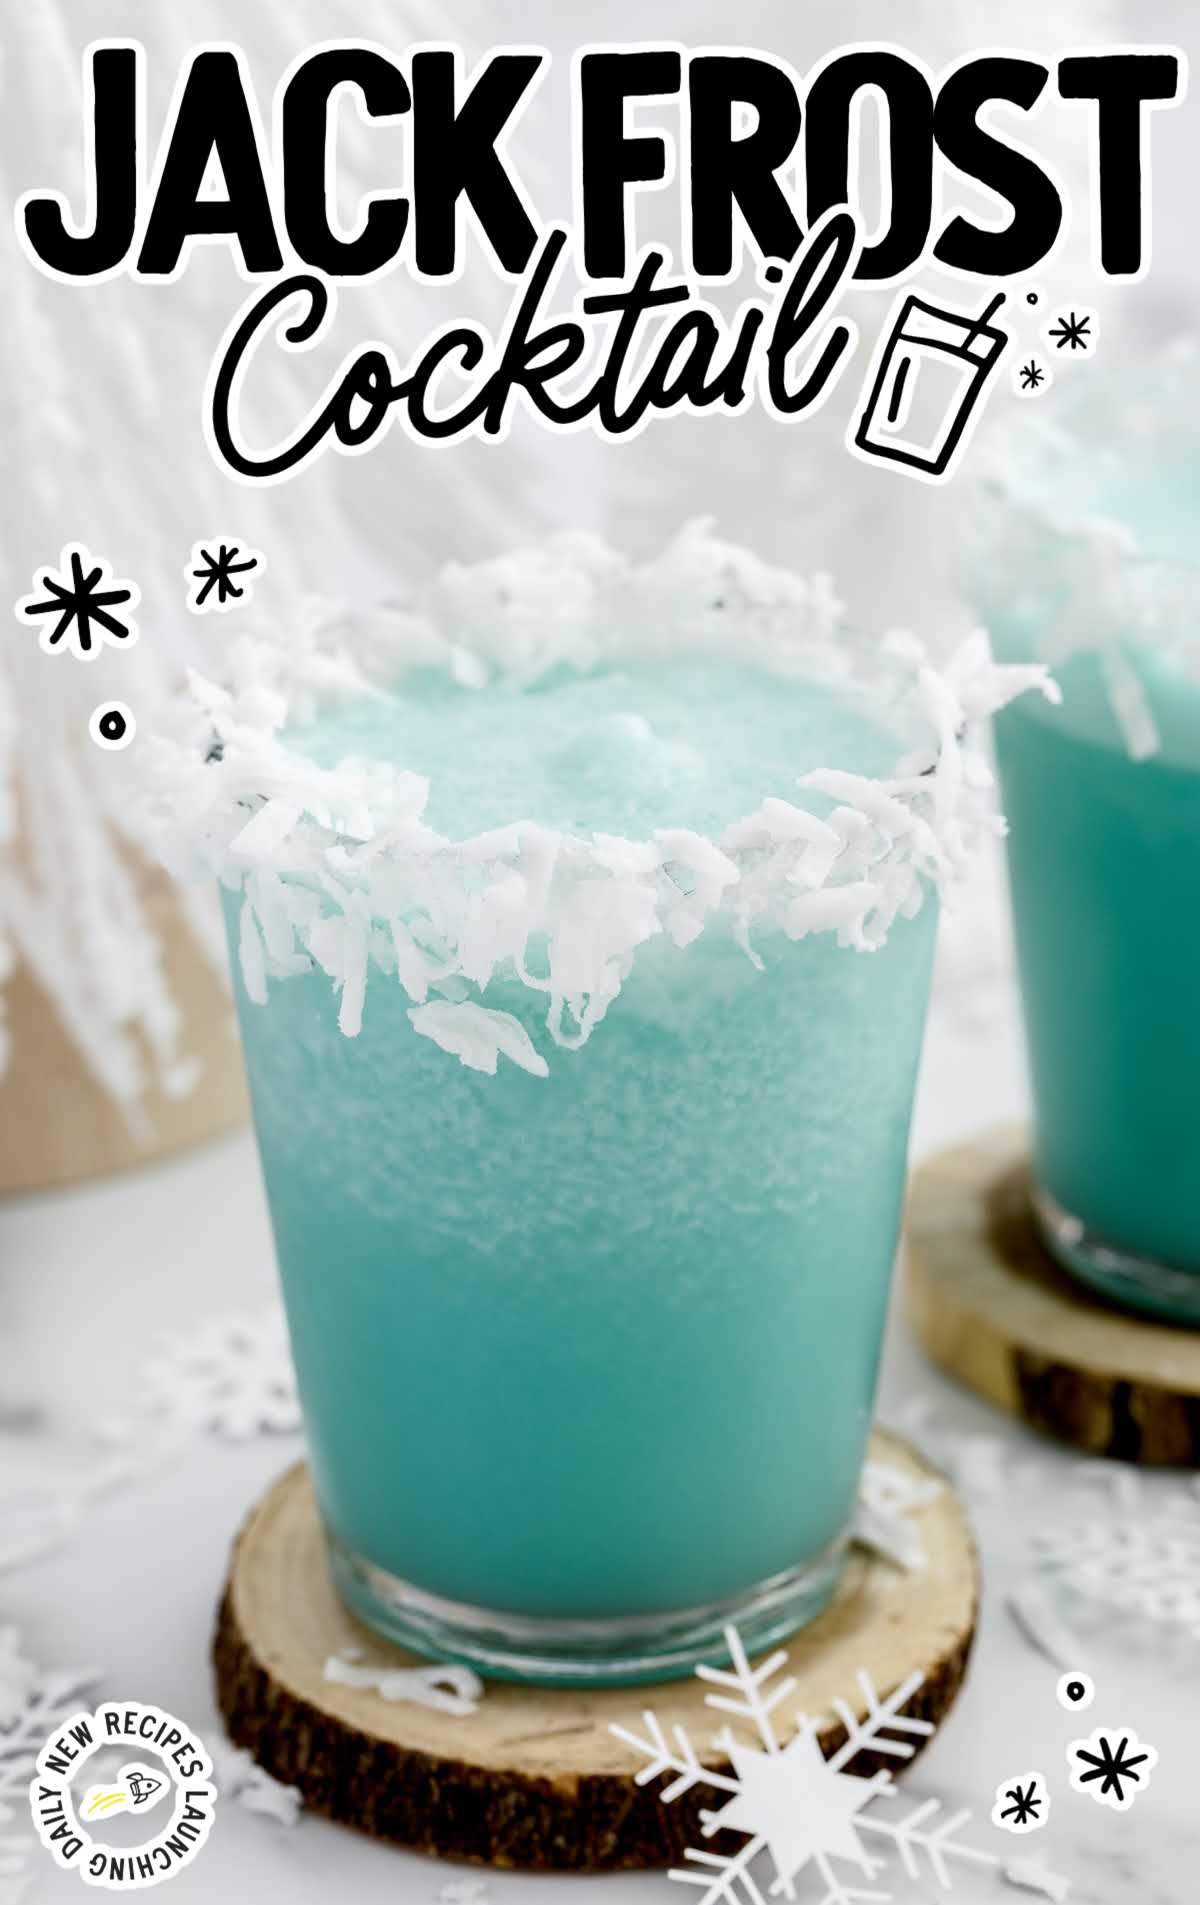 Jack Frost Cocktail topped with shredded coconut in a glass